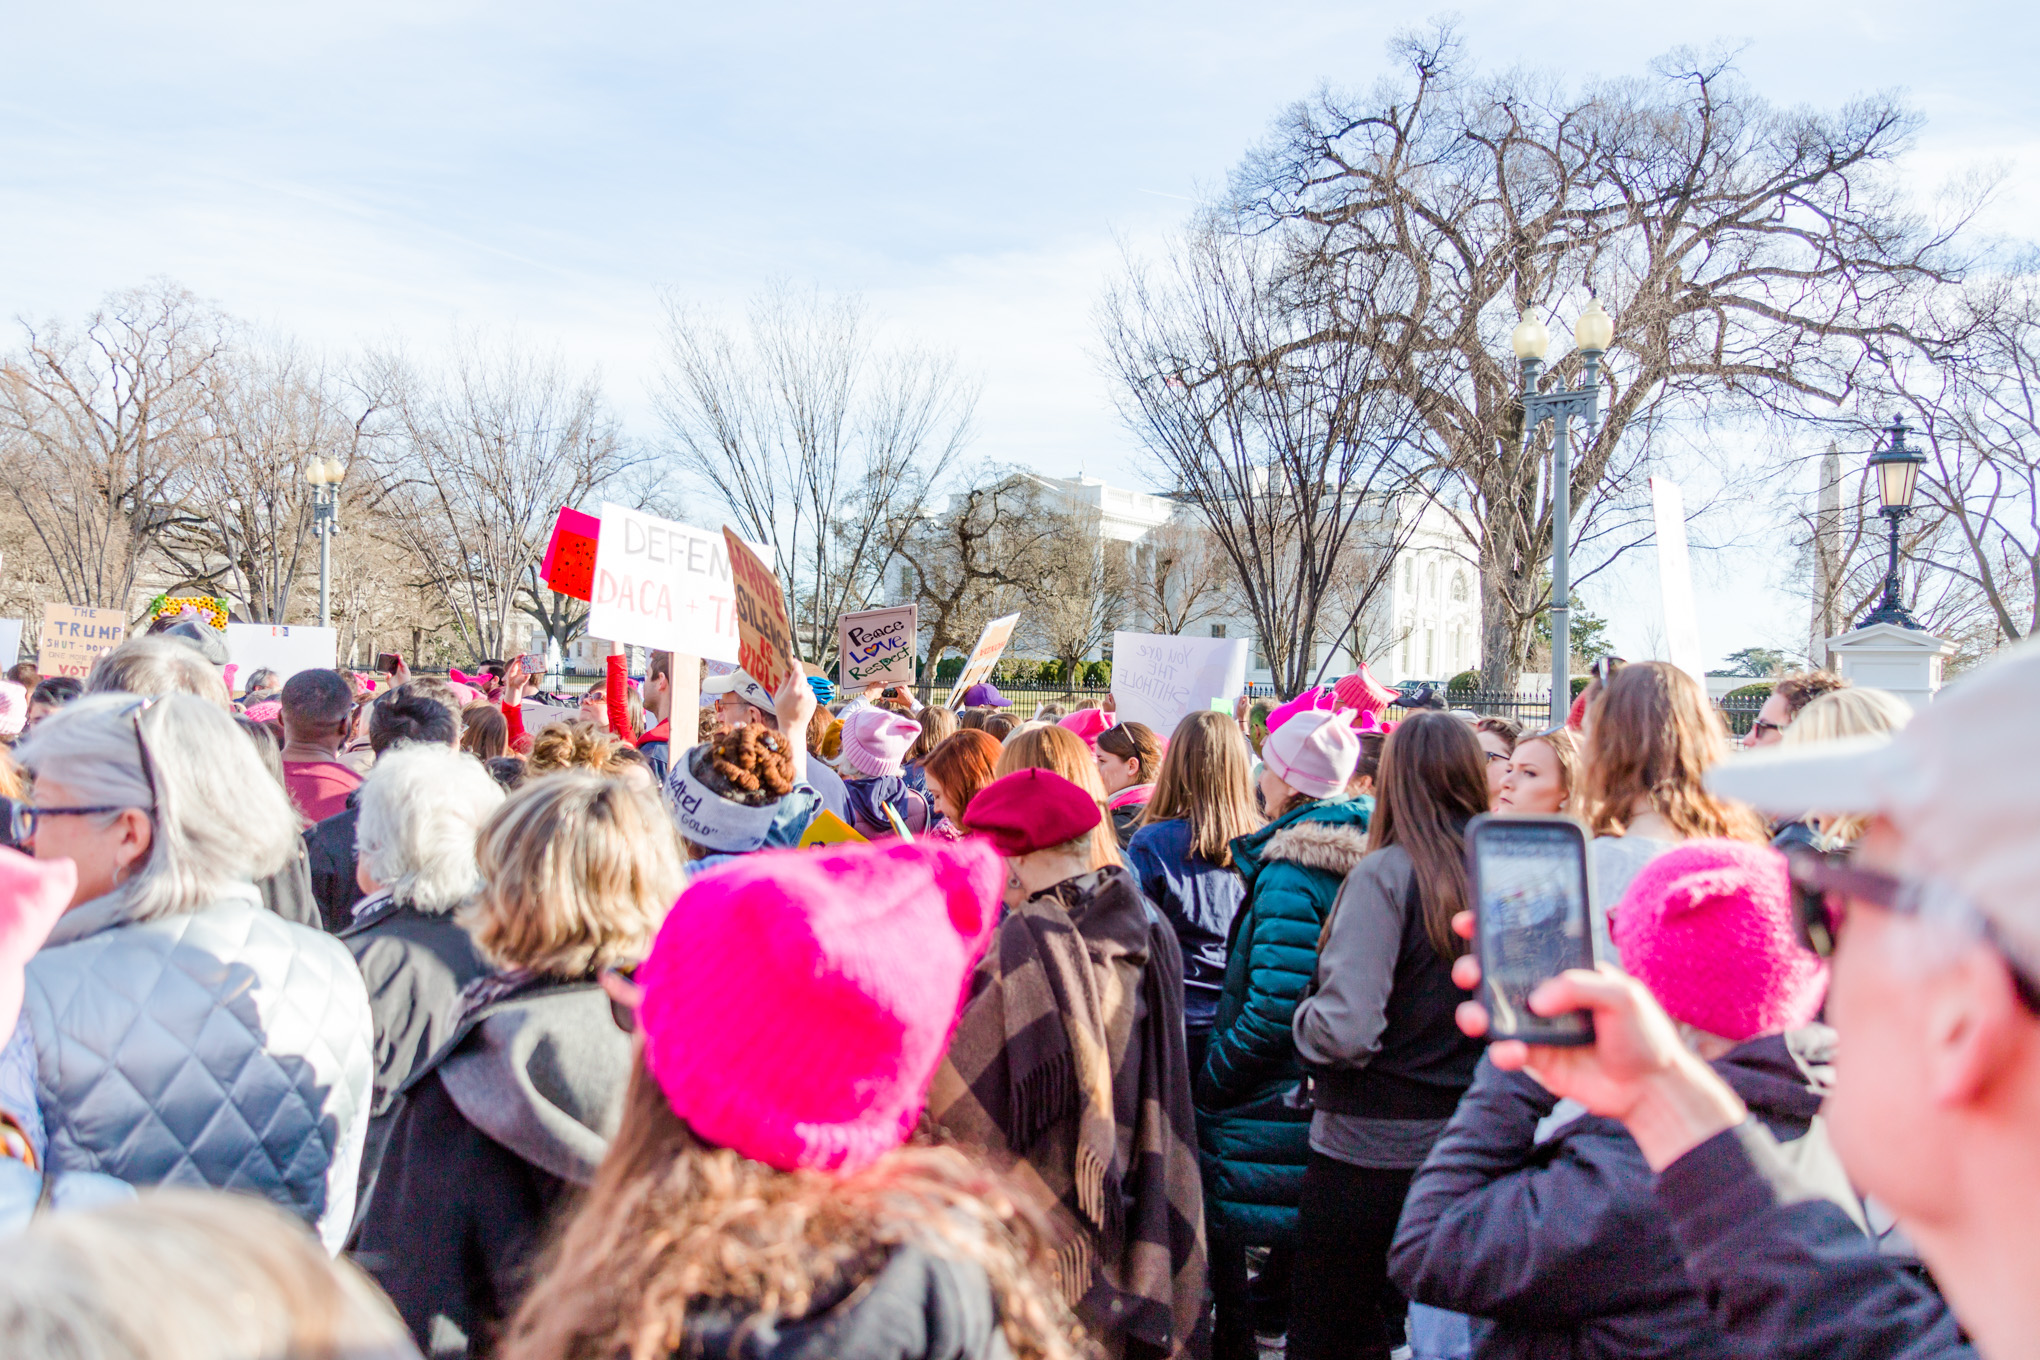 DC Women's March, Women's March, Washington, DC, photo journalism, January 2018, White House, protest